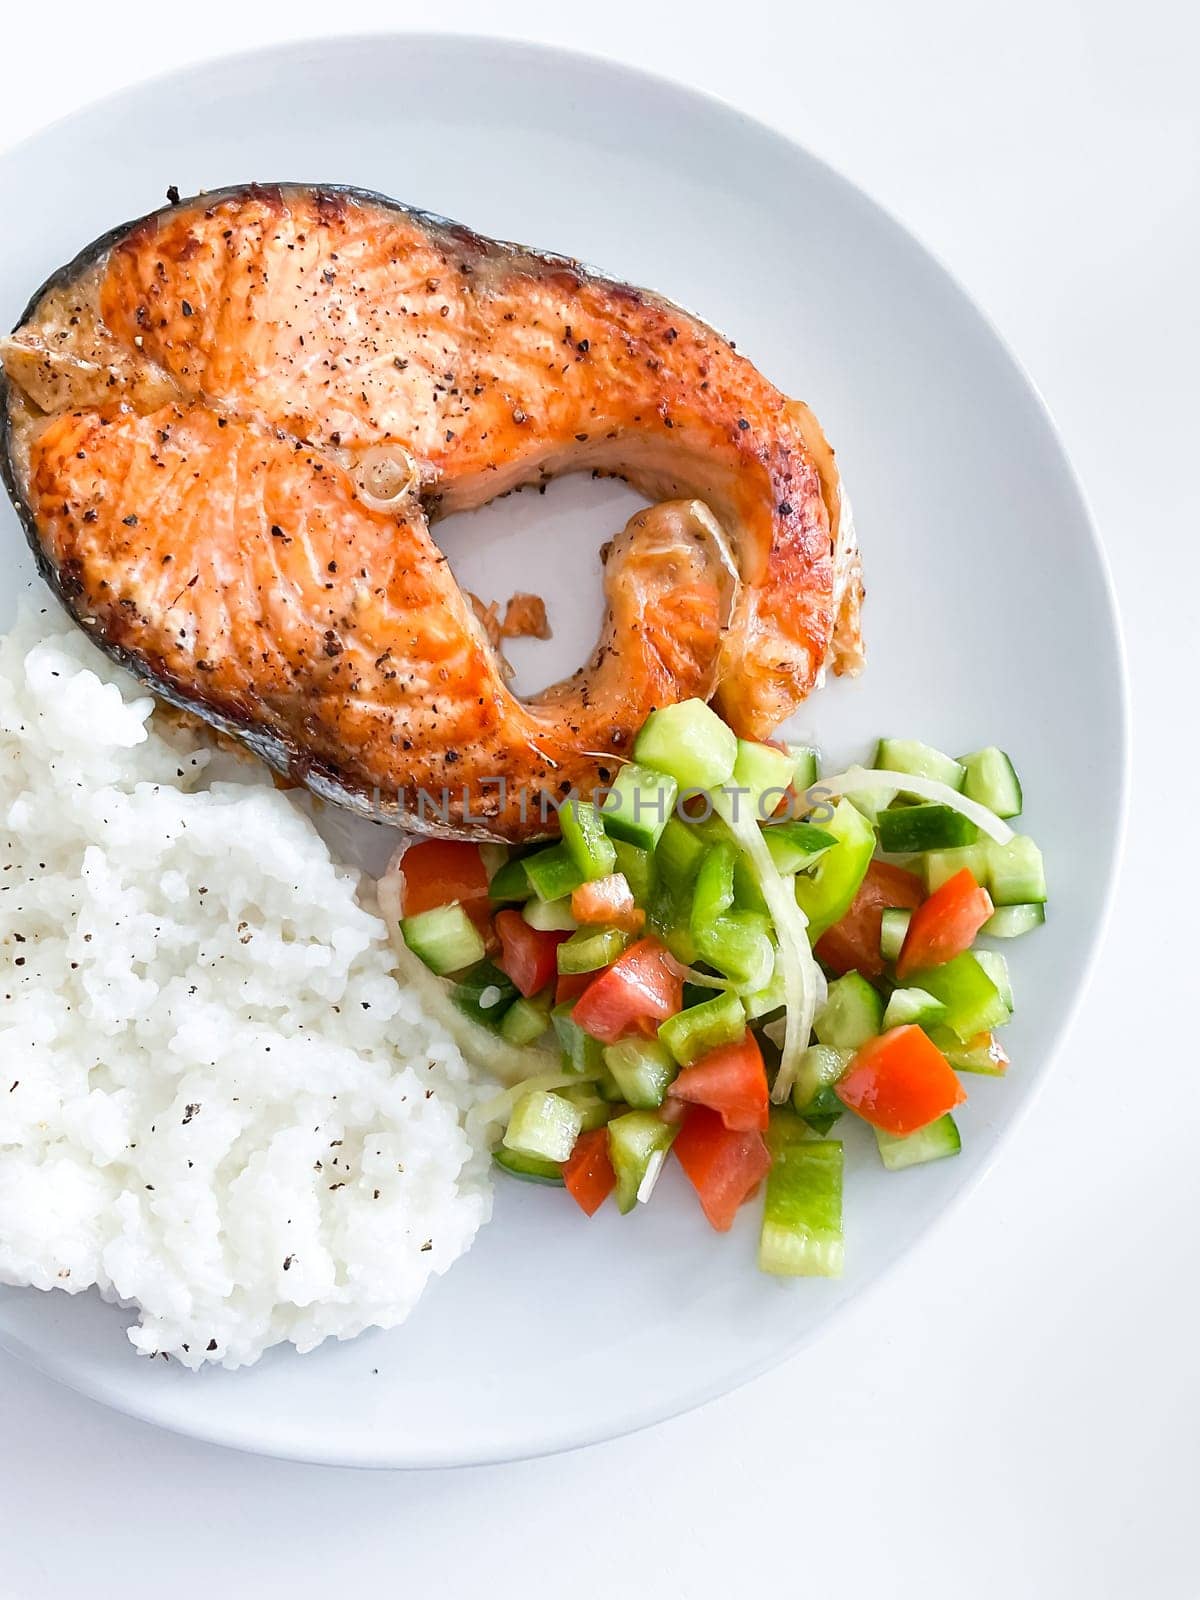 Healthy balanced meal lunch plate - baked salmon by Lunnica